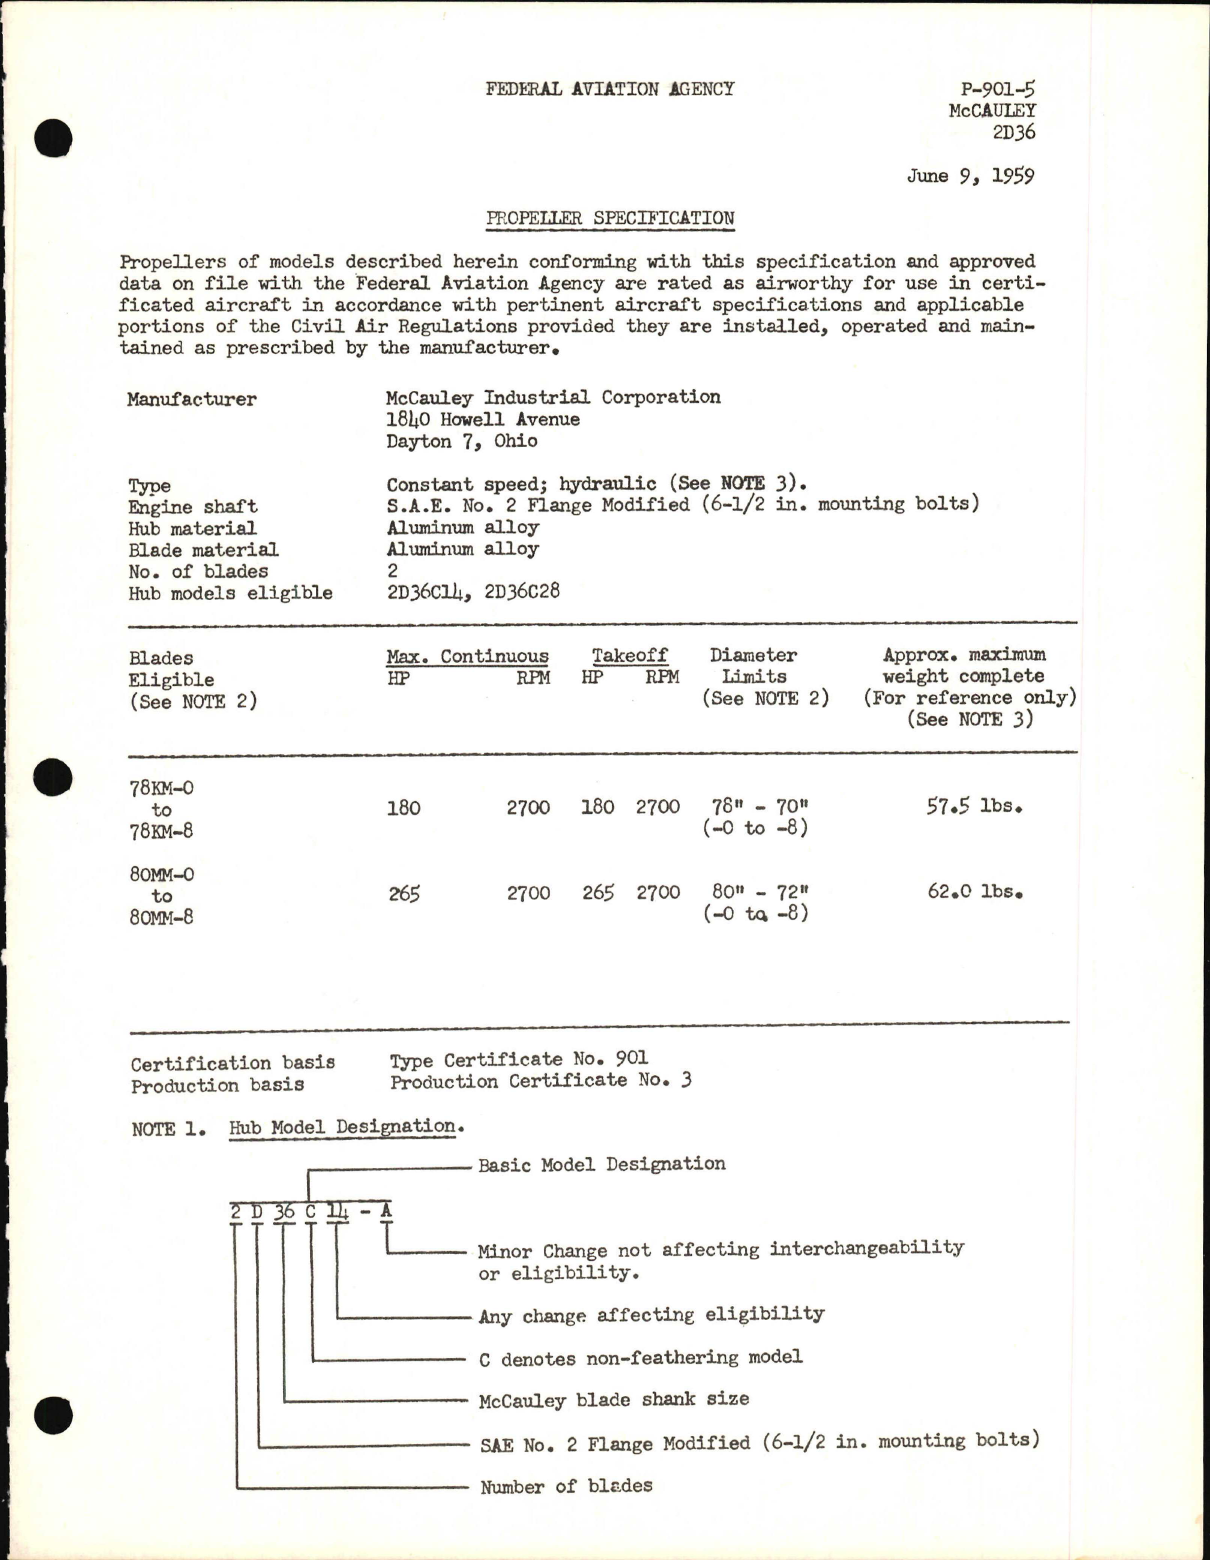 Sample page 1 from AirCorps Library document: 2D36